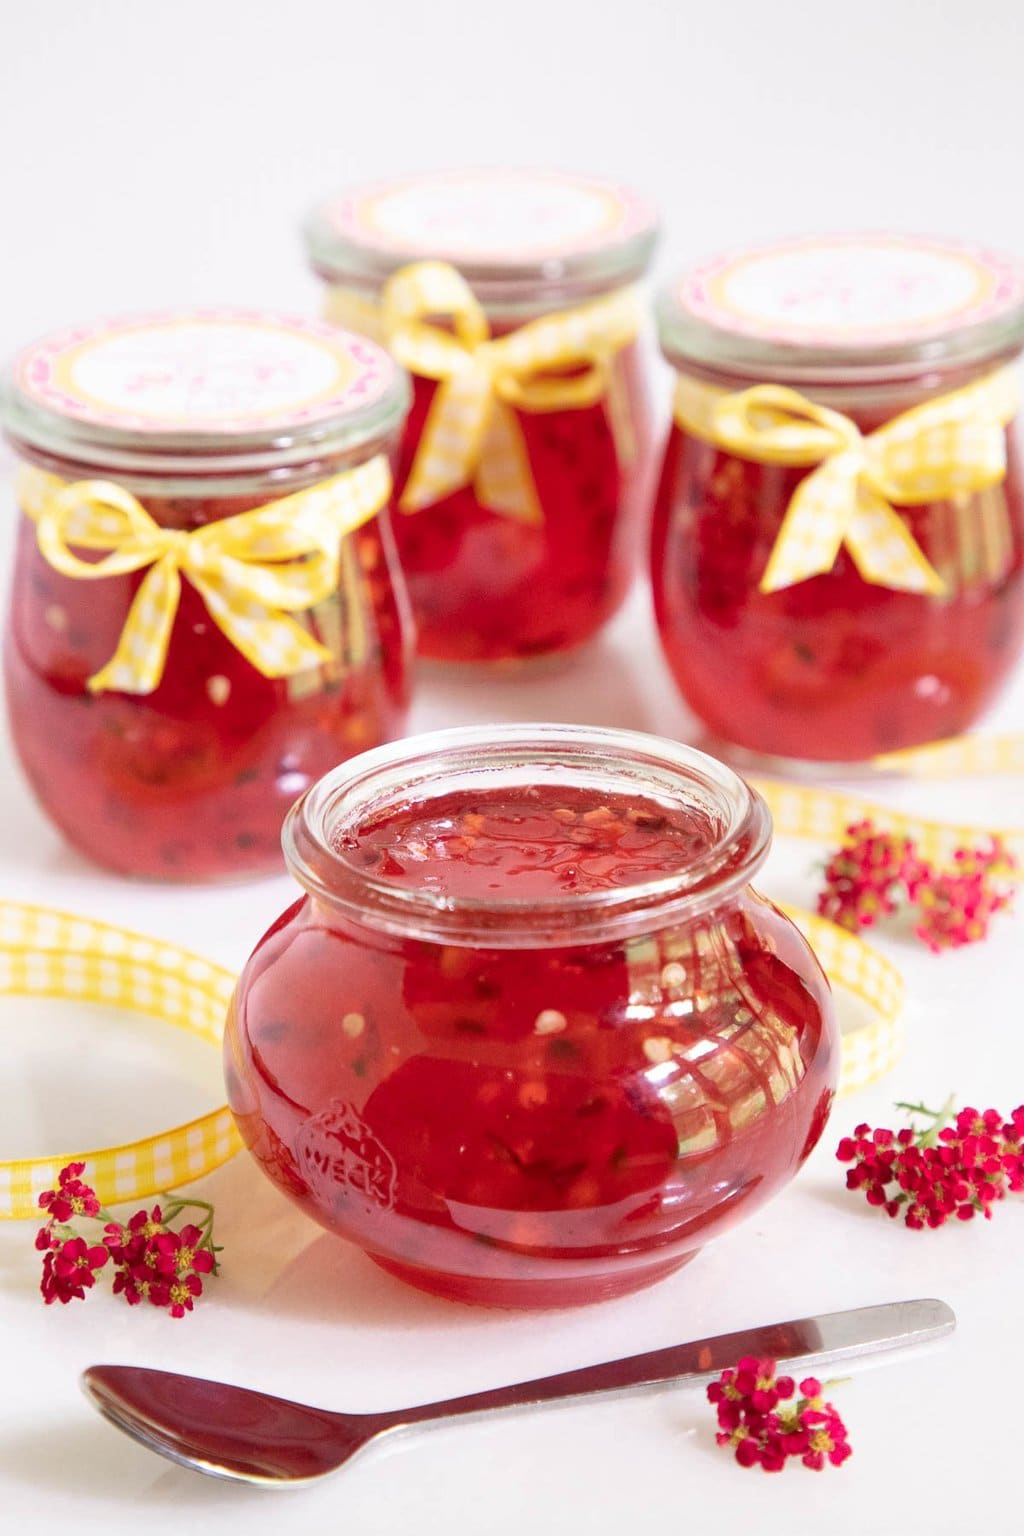 Vertical photo of a batch of Plum Ginger Pepper Jelly in decorative Weck glass jars.